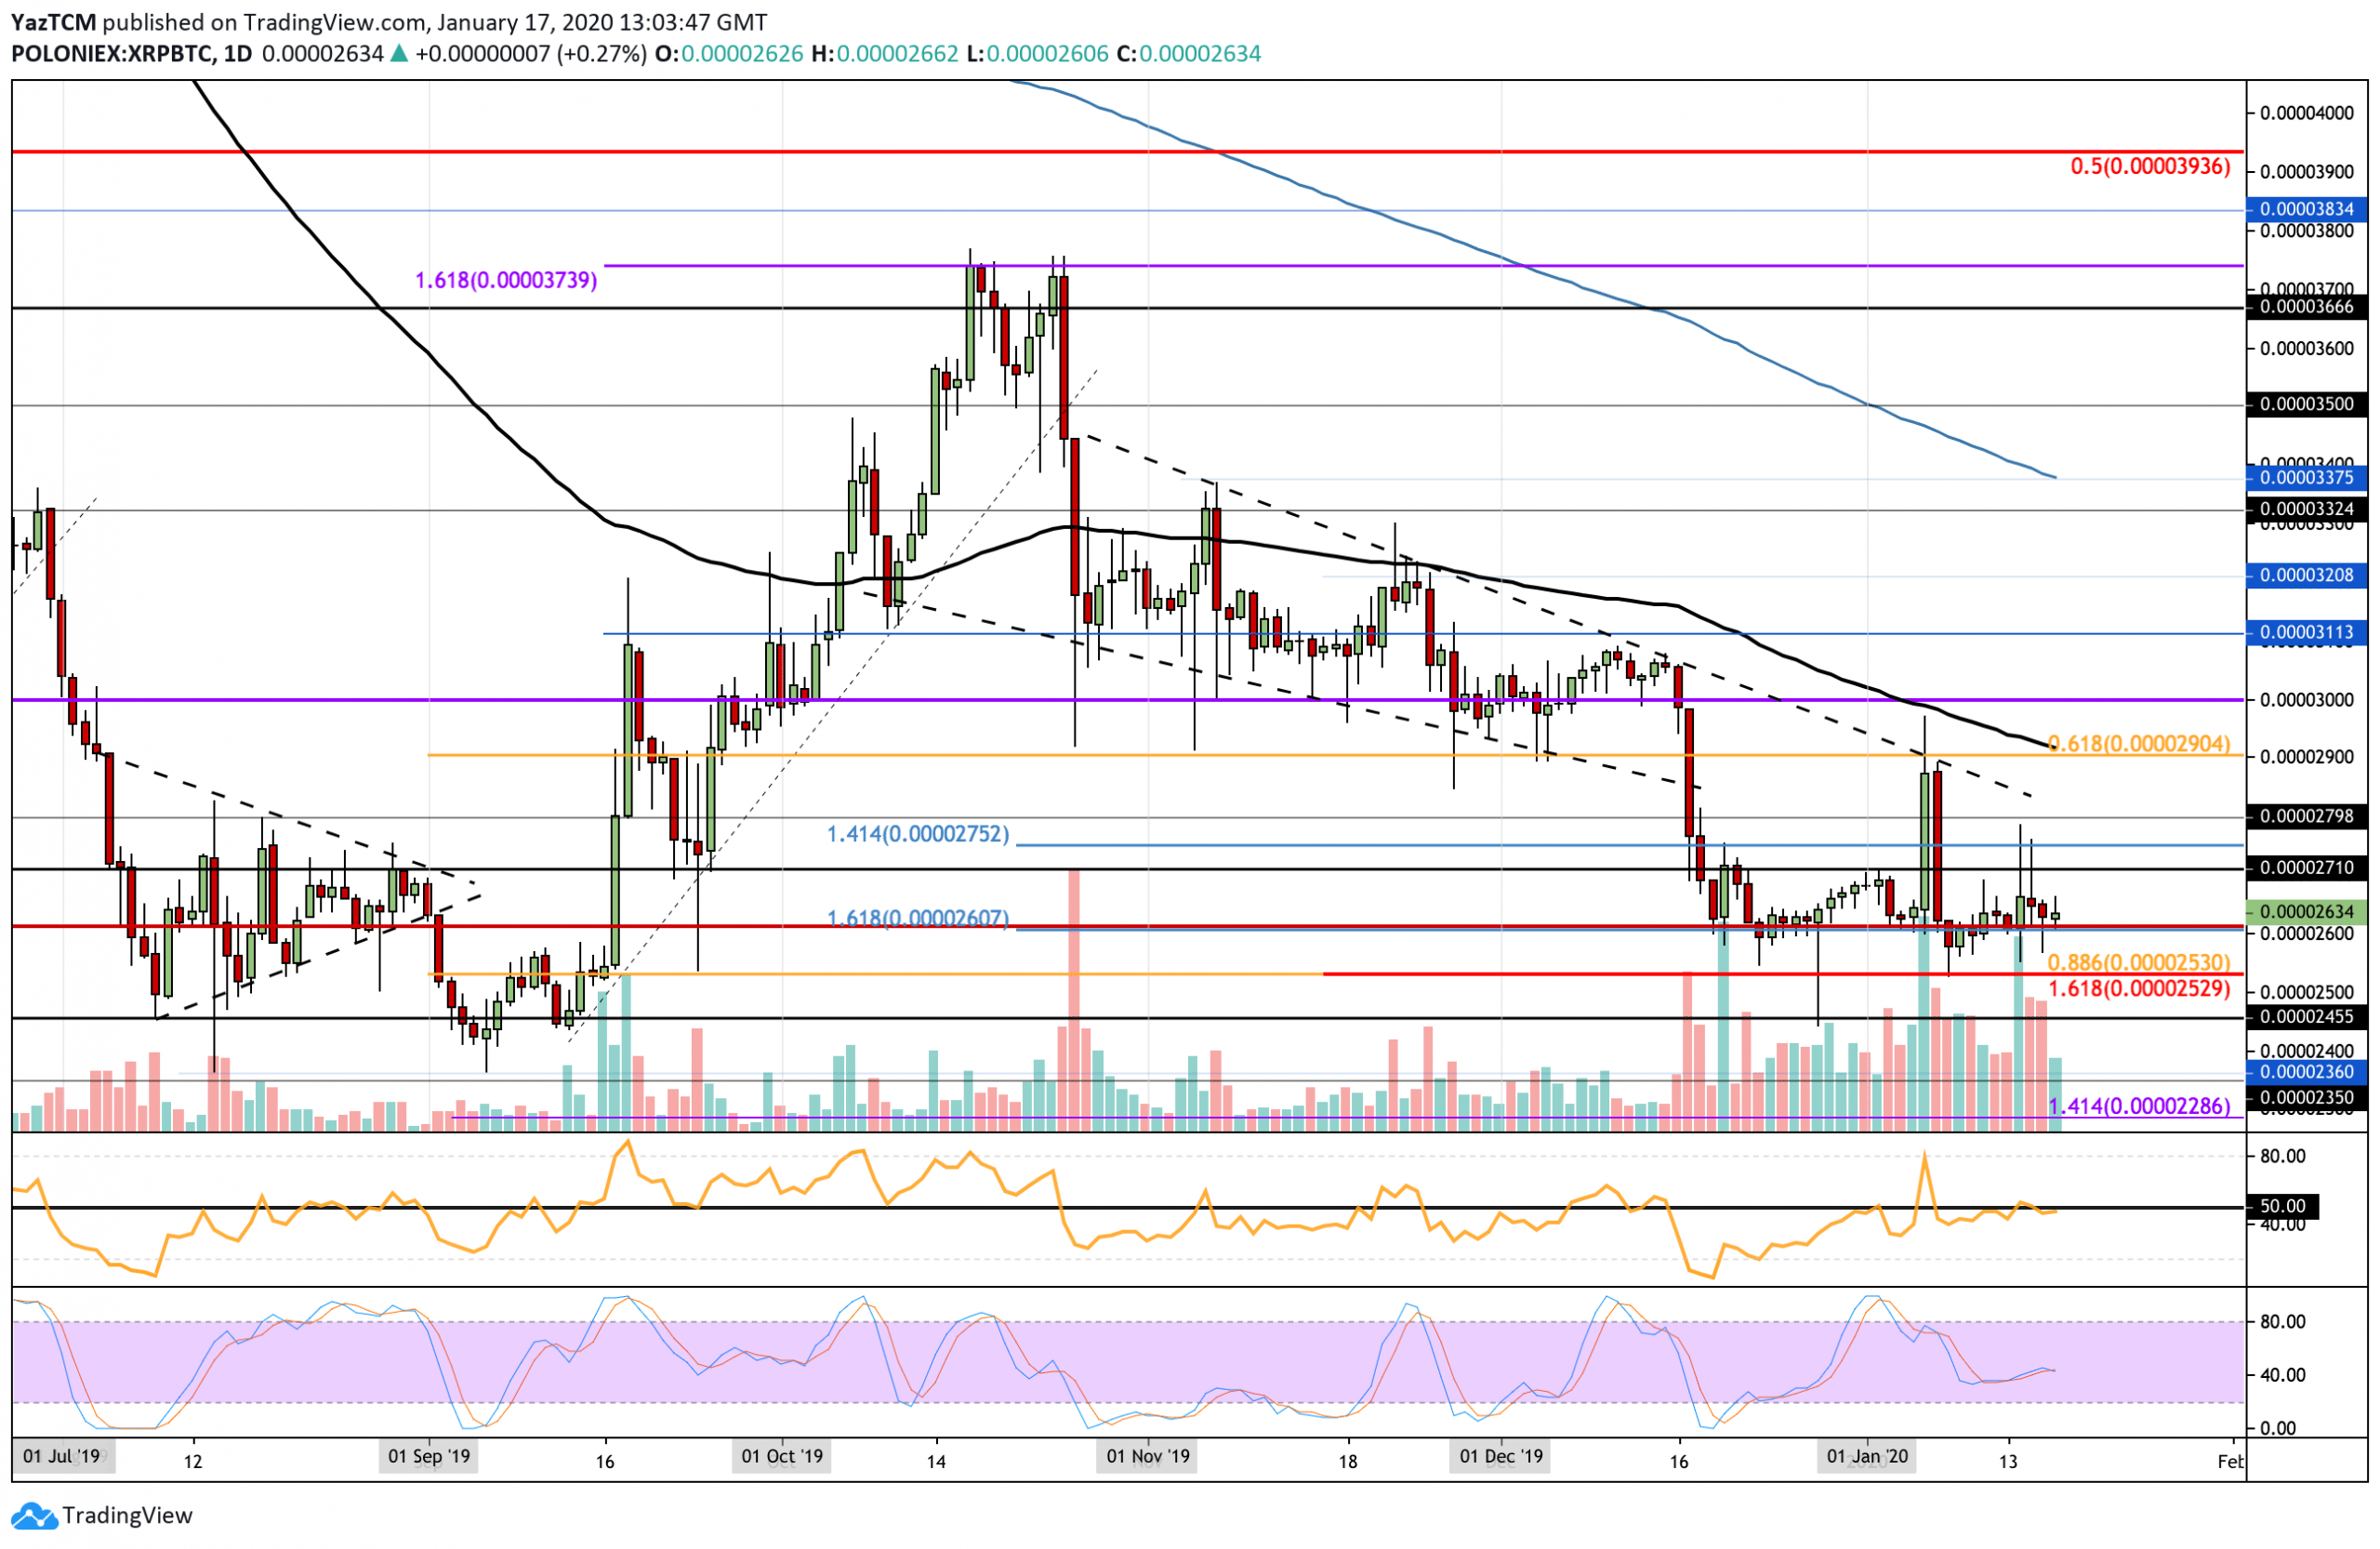 Crypto Price Analysis & Overview January 17th: Bitcoin, Ethereum, Ripple, Tezos, and Ethereum Classic.